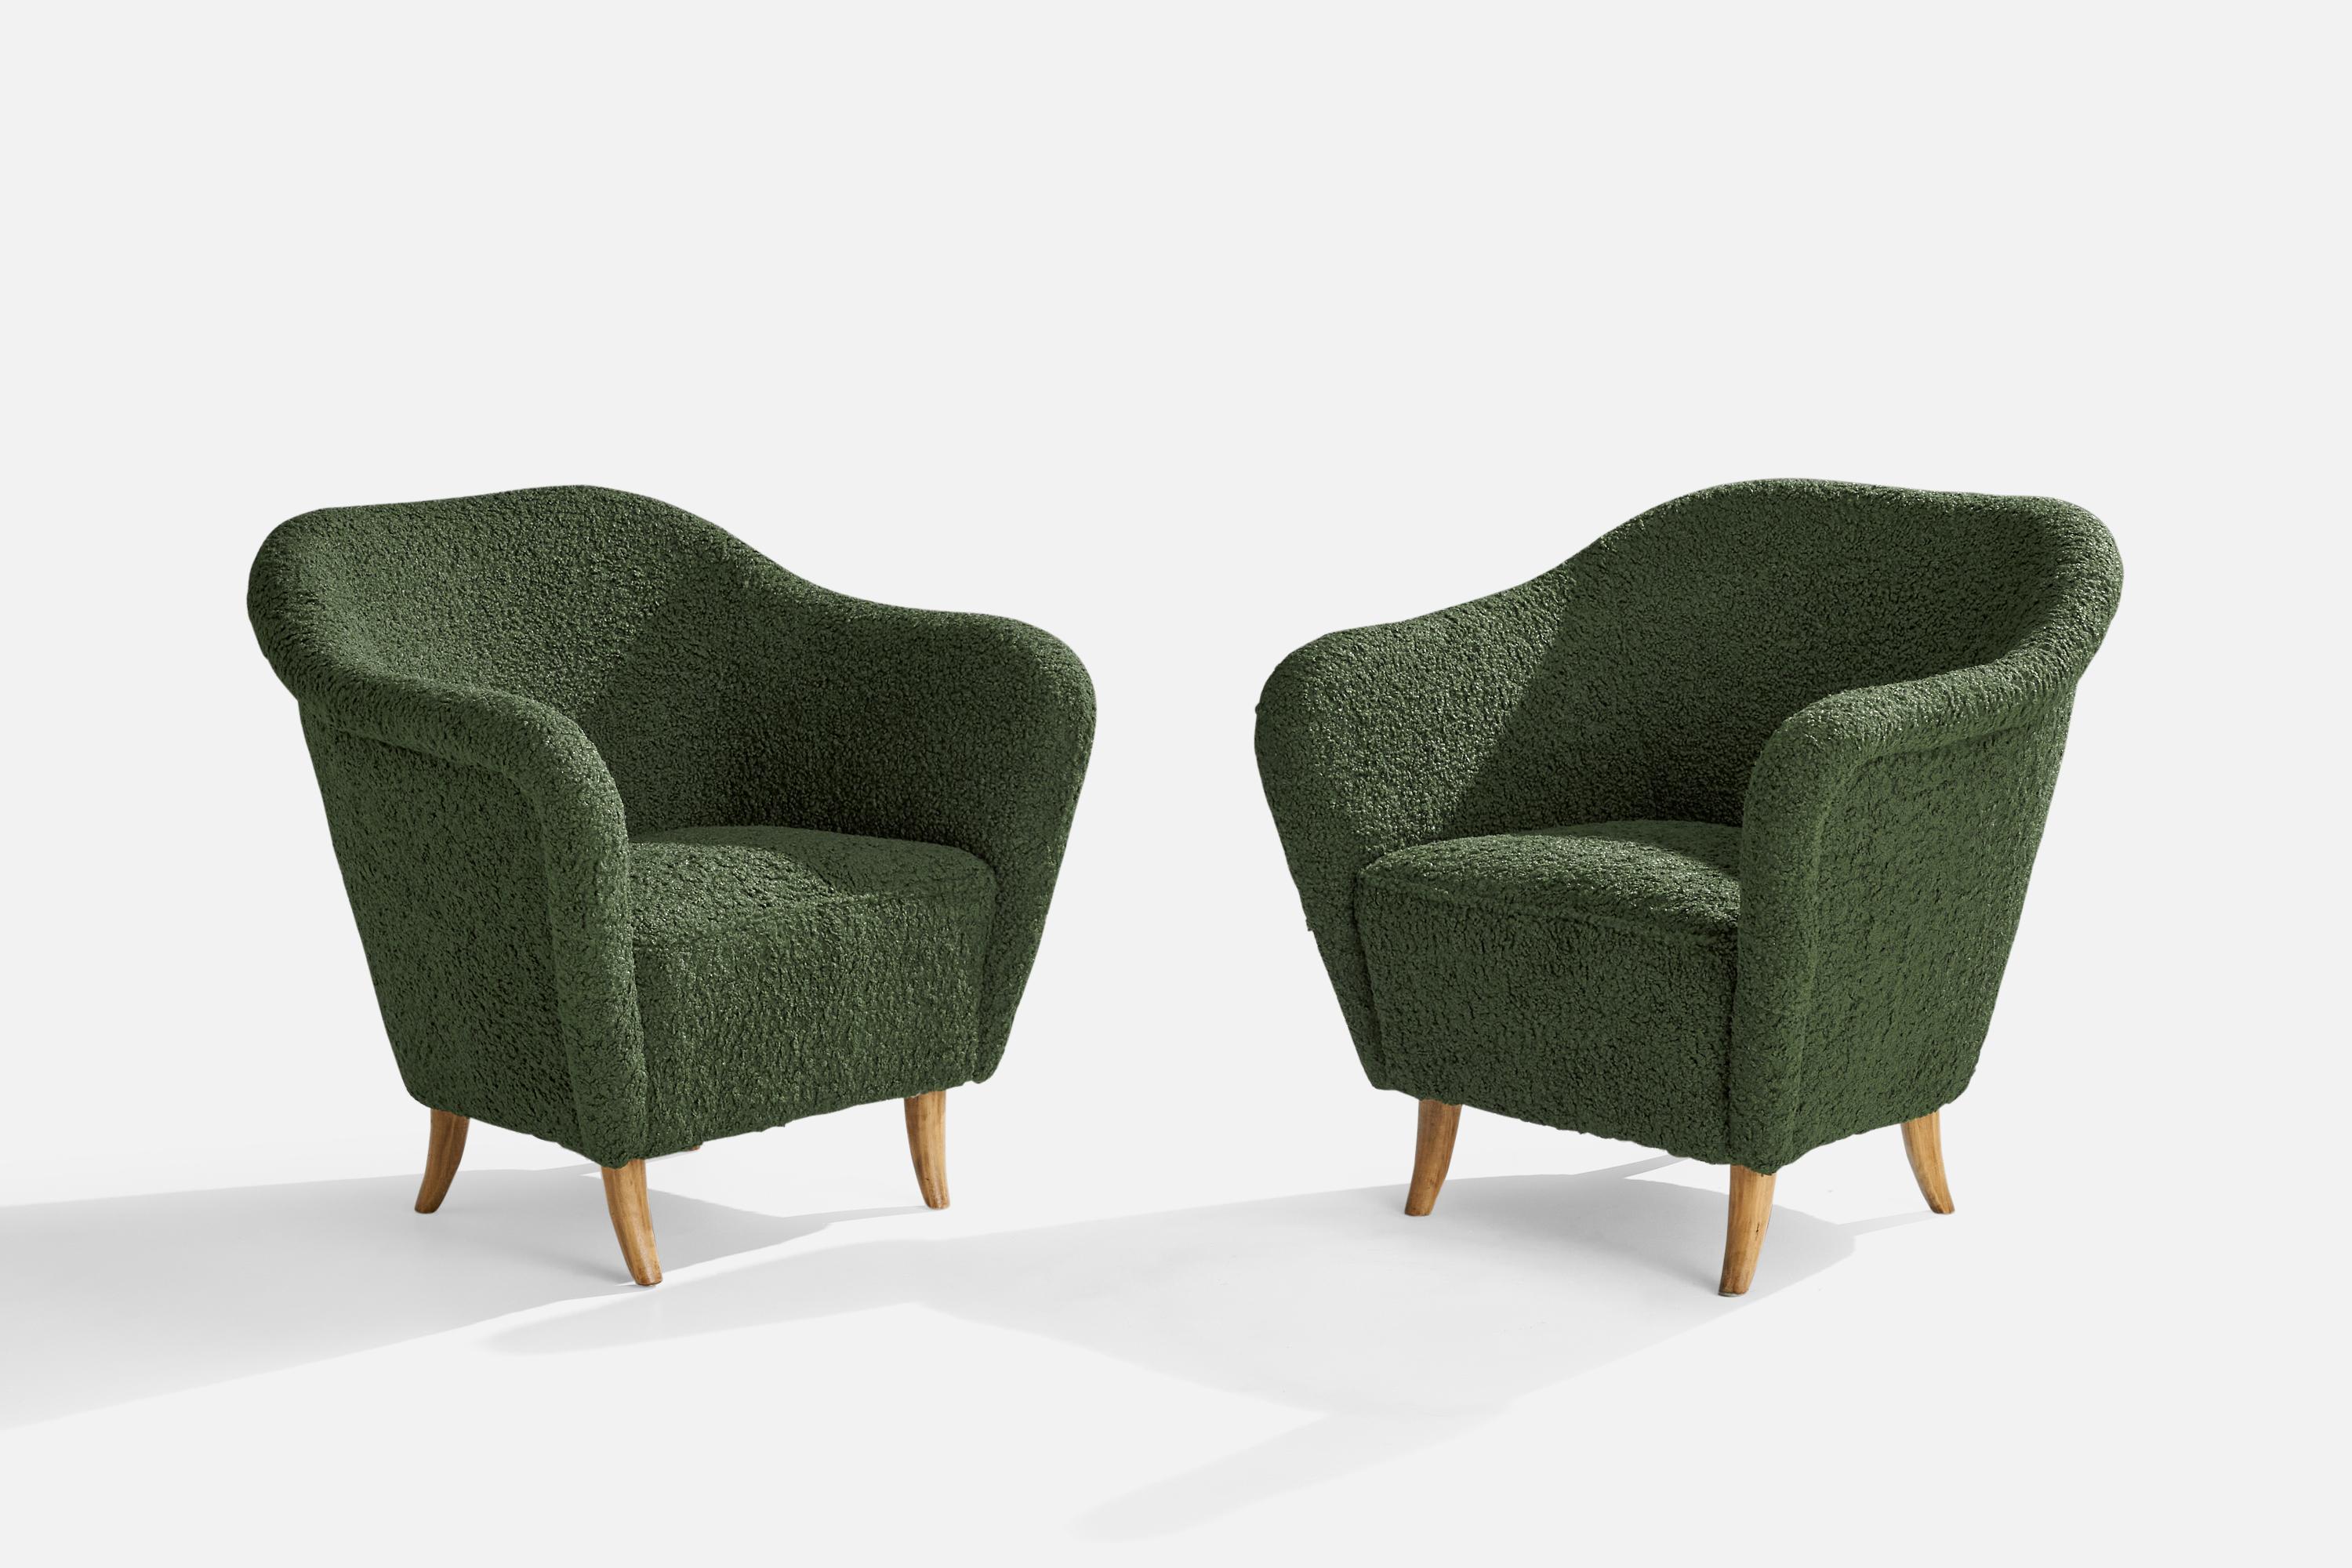 A pair of green bouclé fabric and birch lounge chairs designed and produced in Finland, 1940s.

Seat height 16.5”.